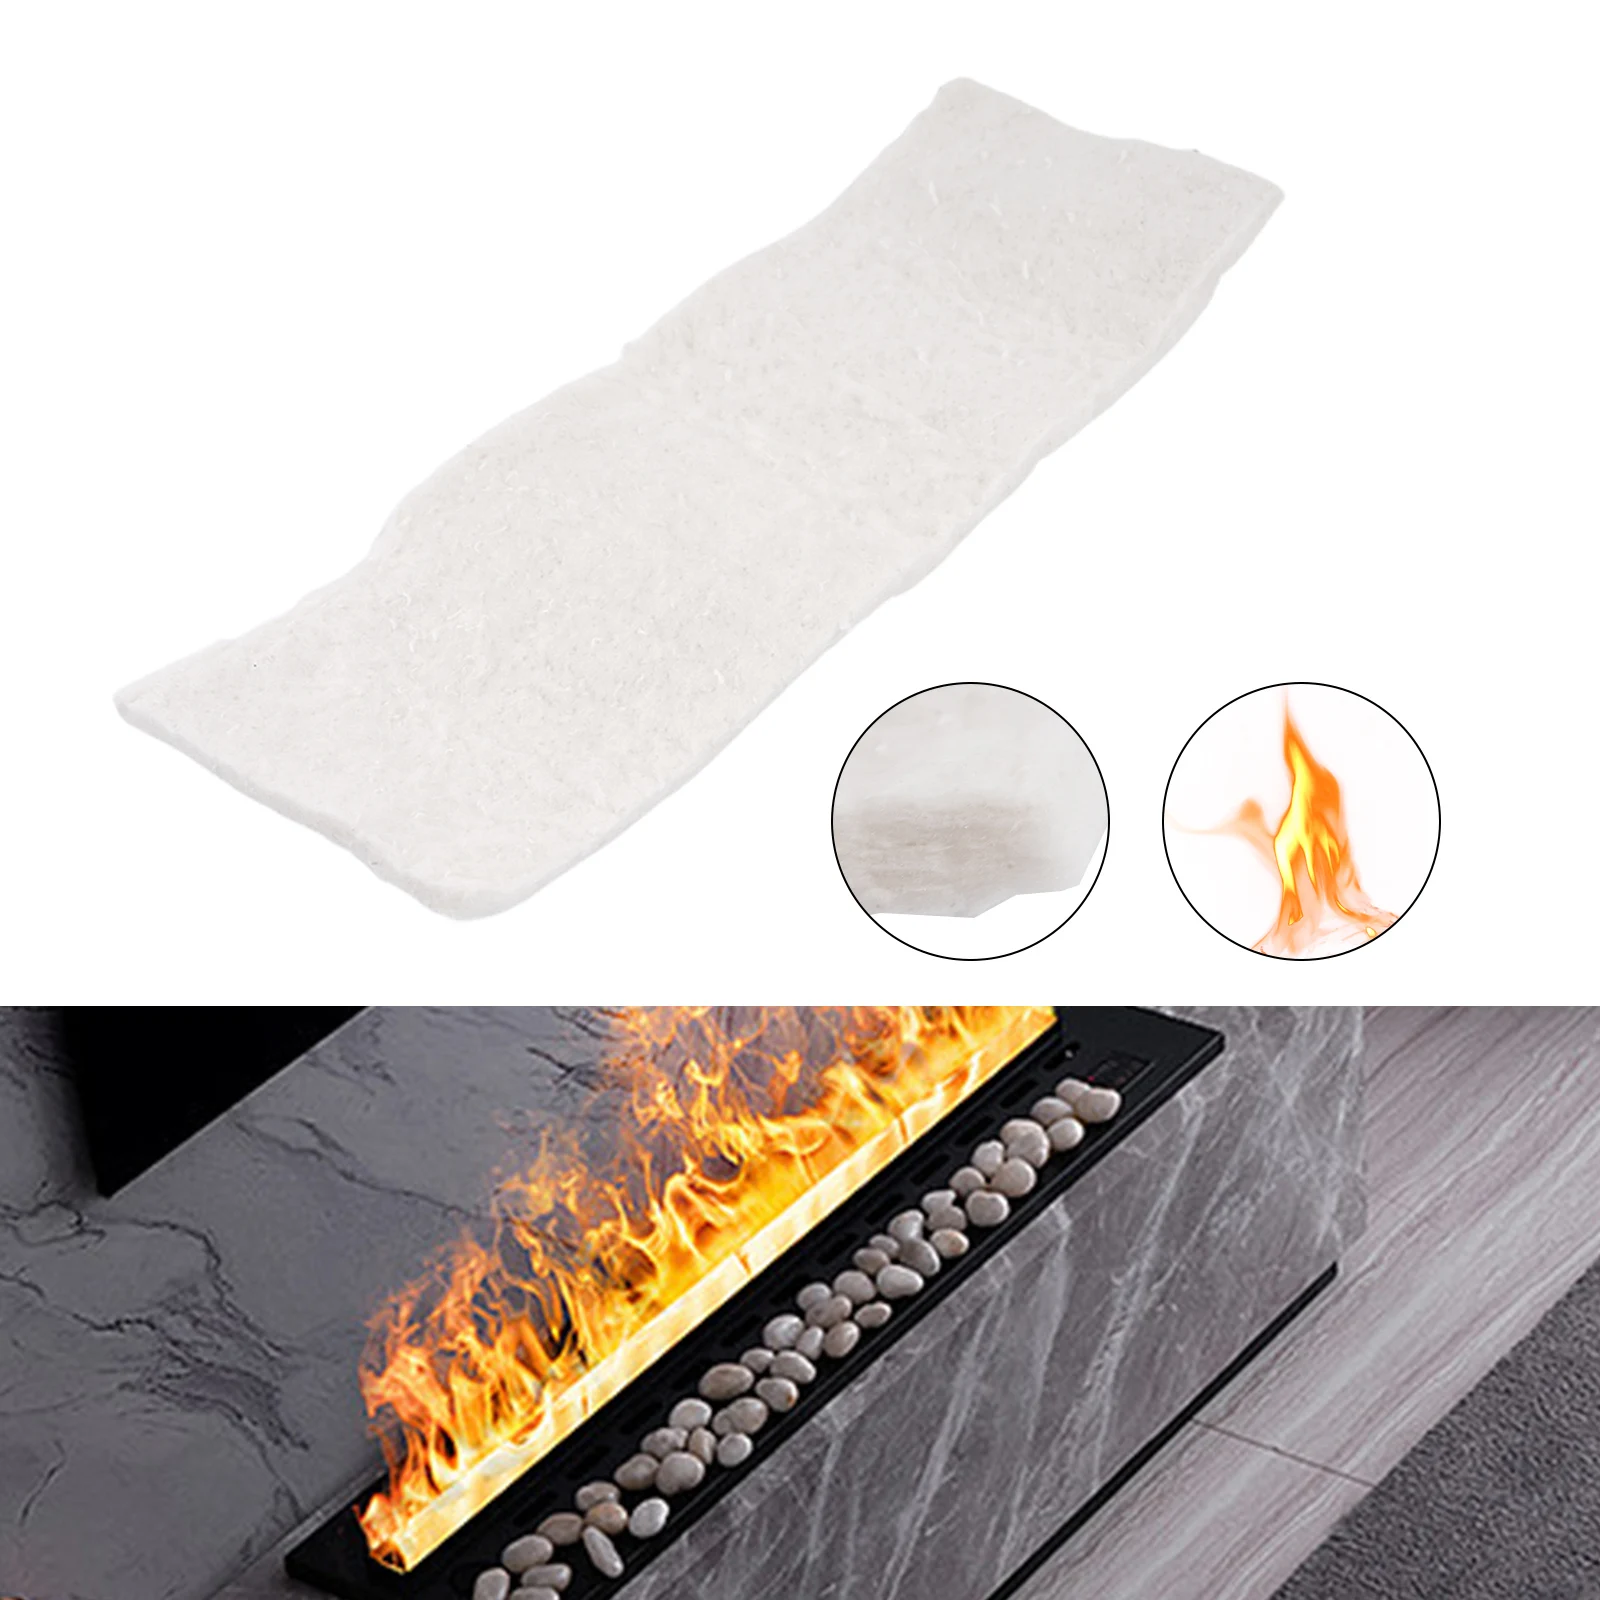 

Ceramic Fiber Blanket For Firplace High Temperature Resistance Zirconium Bearing Fire Resistant Insulation Cotton For Fire Resis